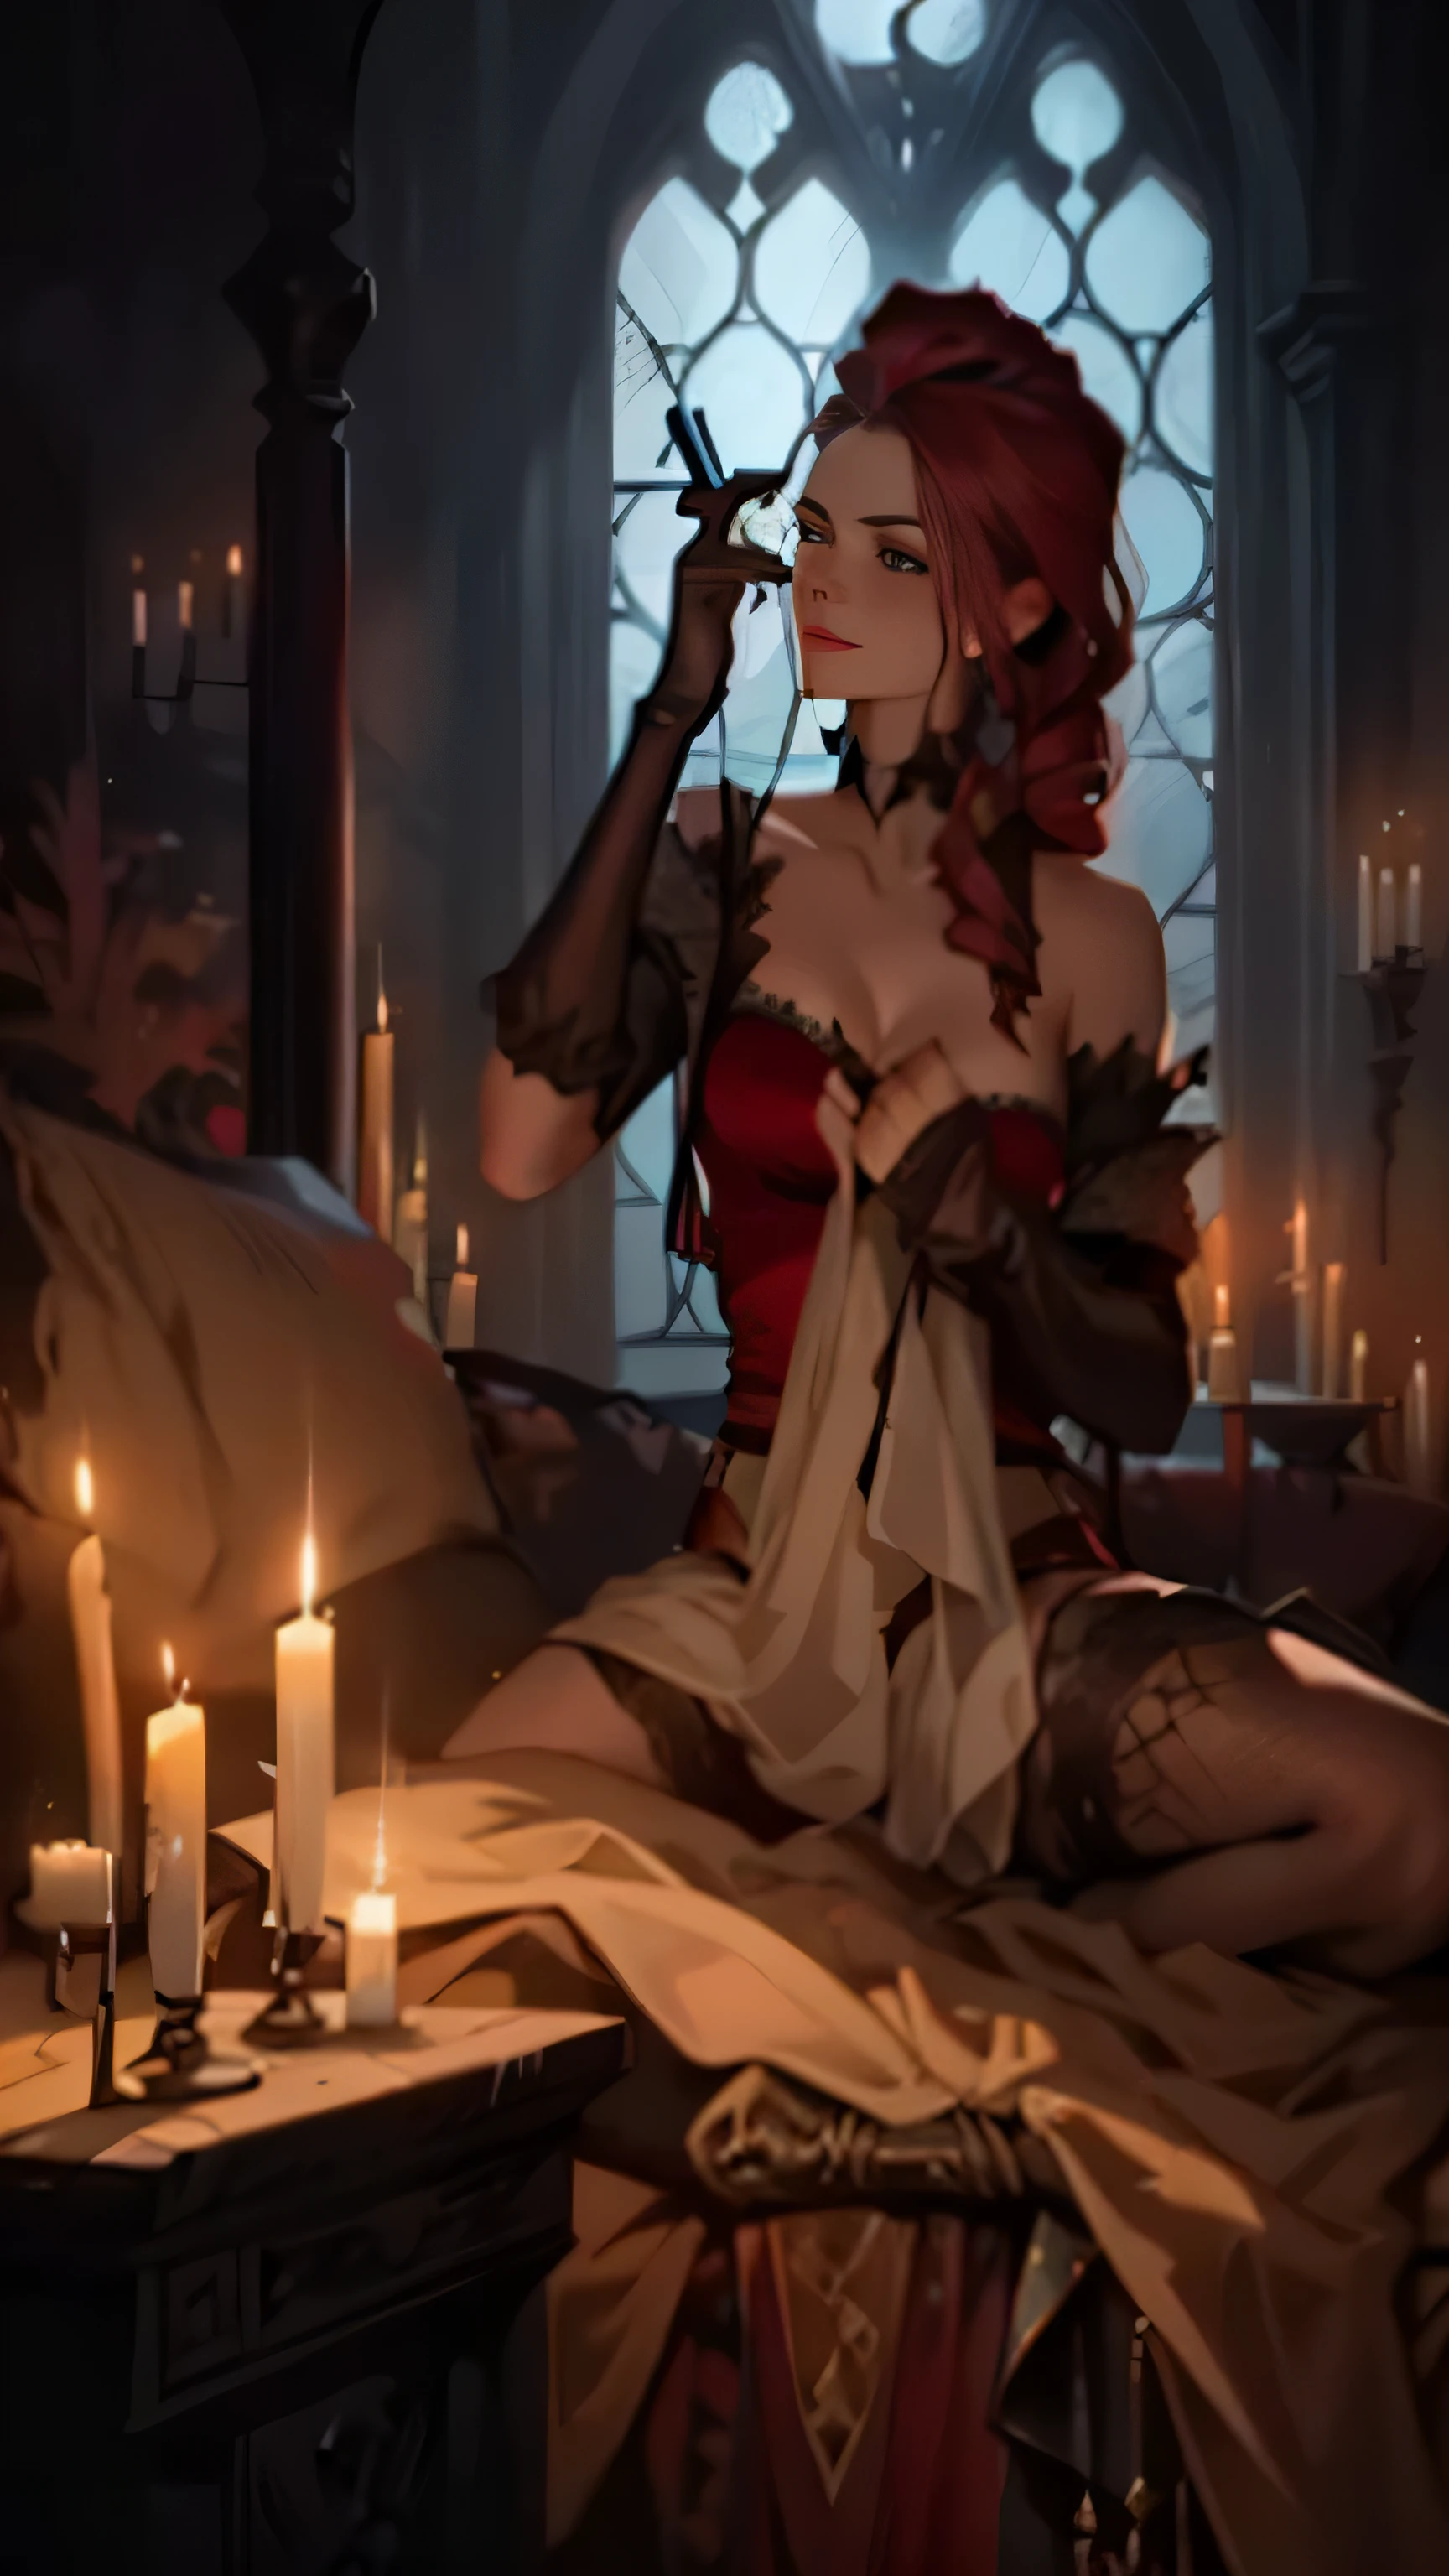 a woman in a red dress sitting on a bed next to candles, abaddon and magali villeneuve, vampires fantasy, by Galen Dara, gothic fantasy art, witcher)), gwent, gothic romance, medieval fantasy art, magali villeneuve', inspired by Magali Villeneuve, by Magali Villeneuve, succubuedieval, trending on deviant art